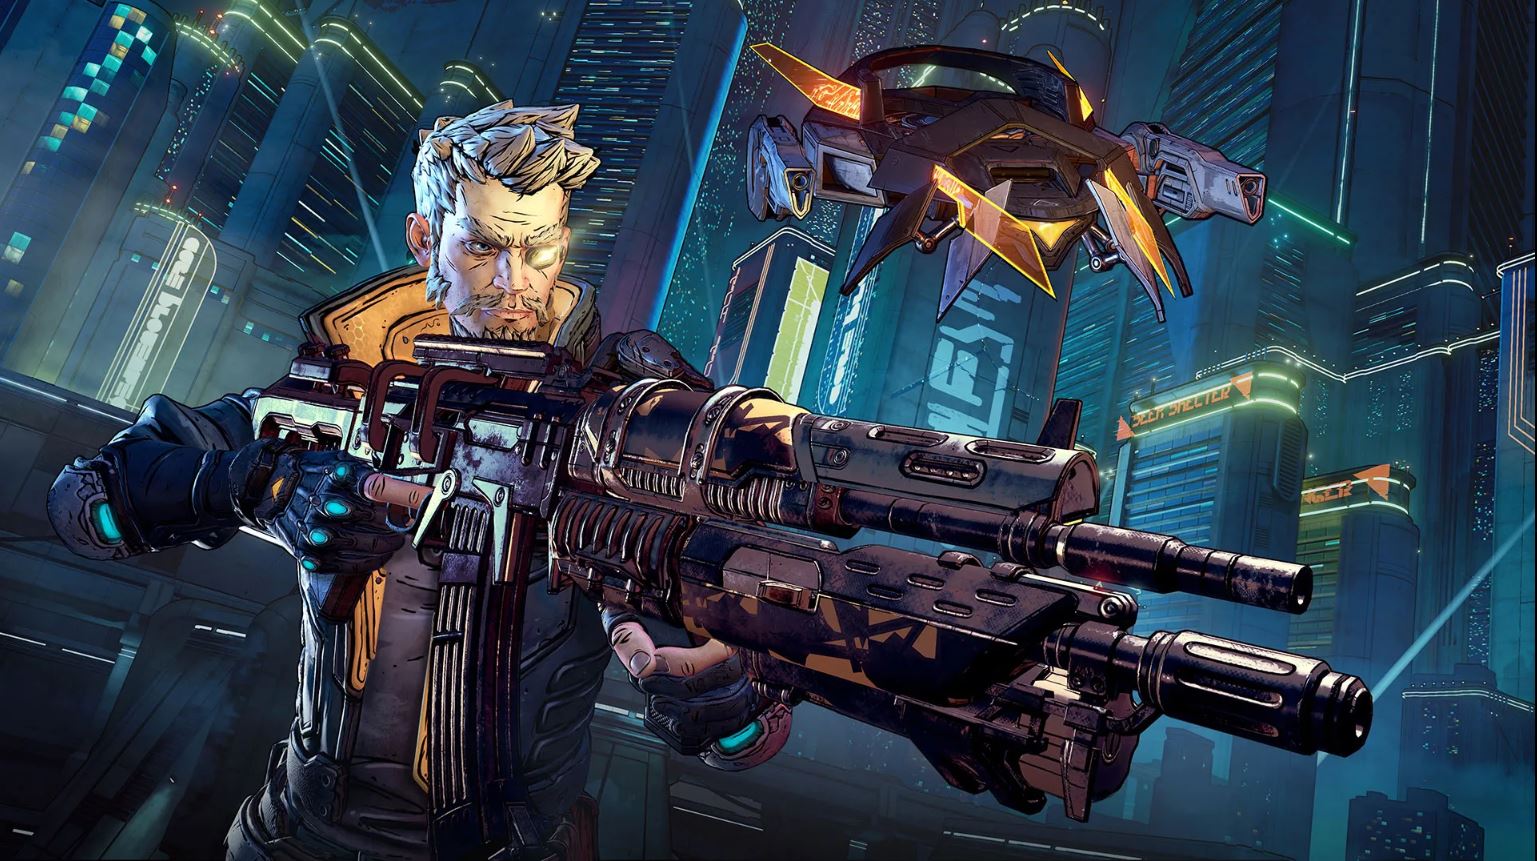 Image for Don't miss Borderlands 3 for $25 on PS4 and Xbox One